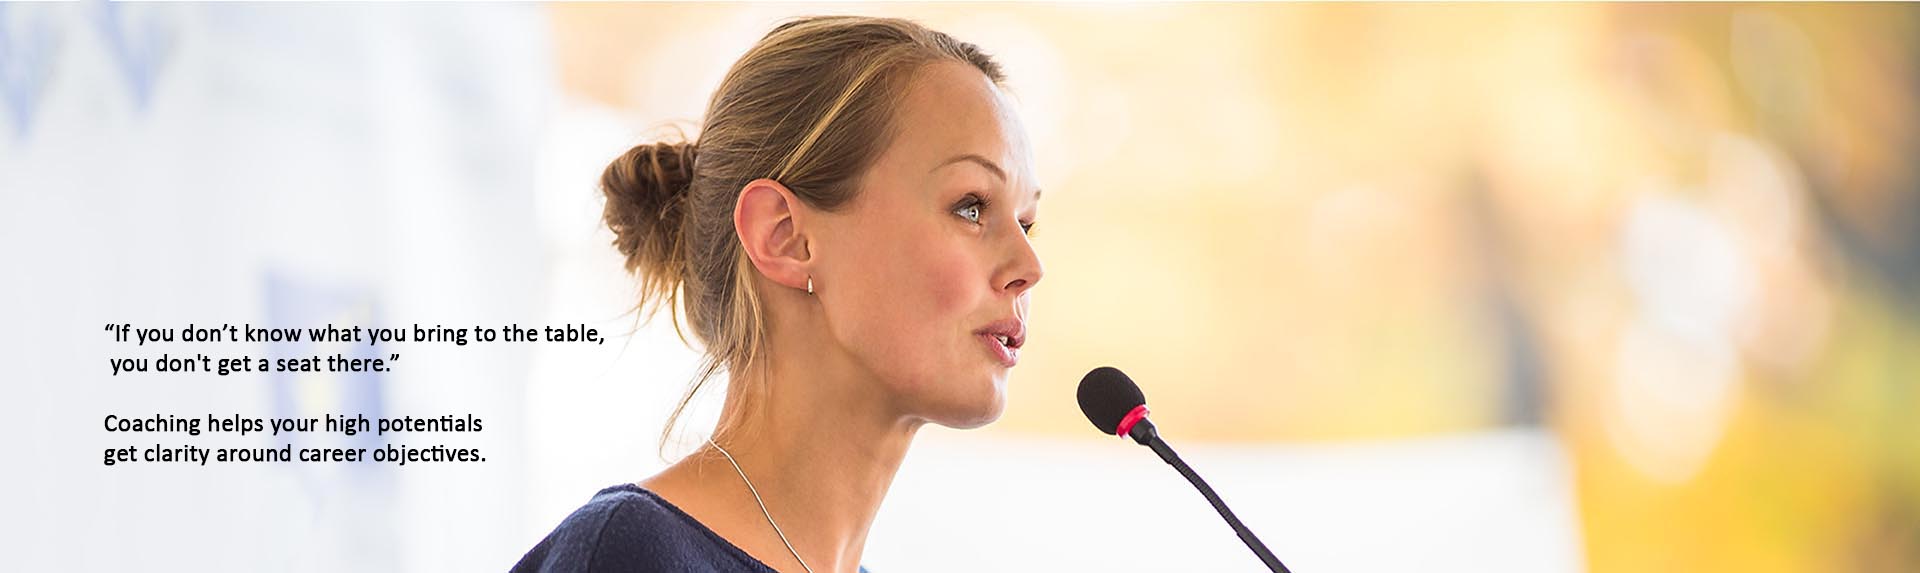 attractive business woman speaking into microphone